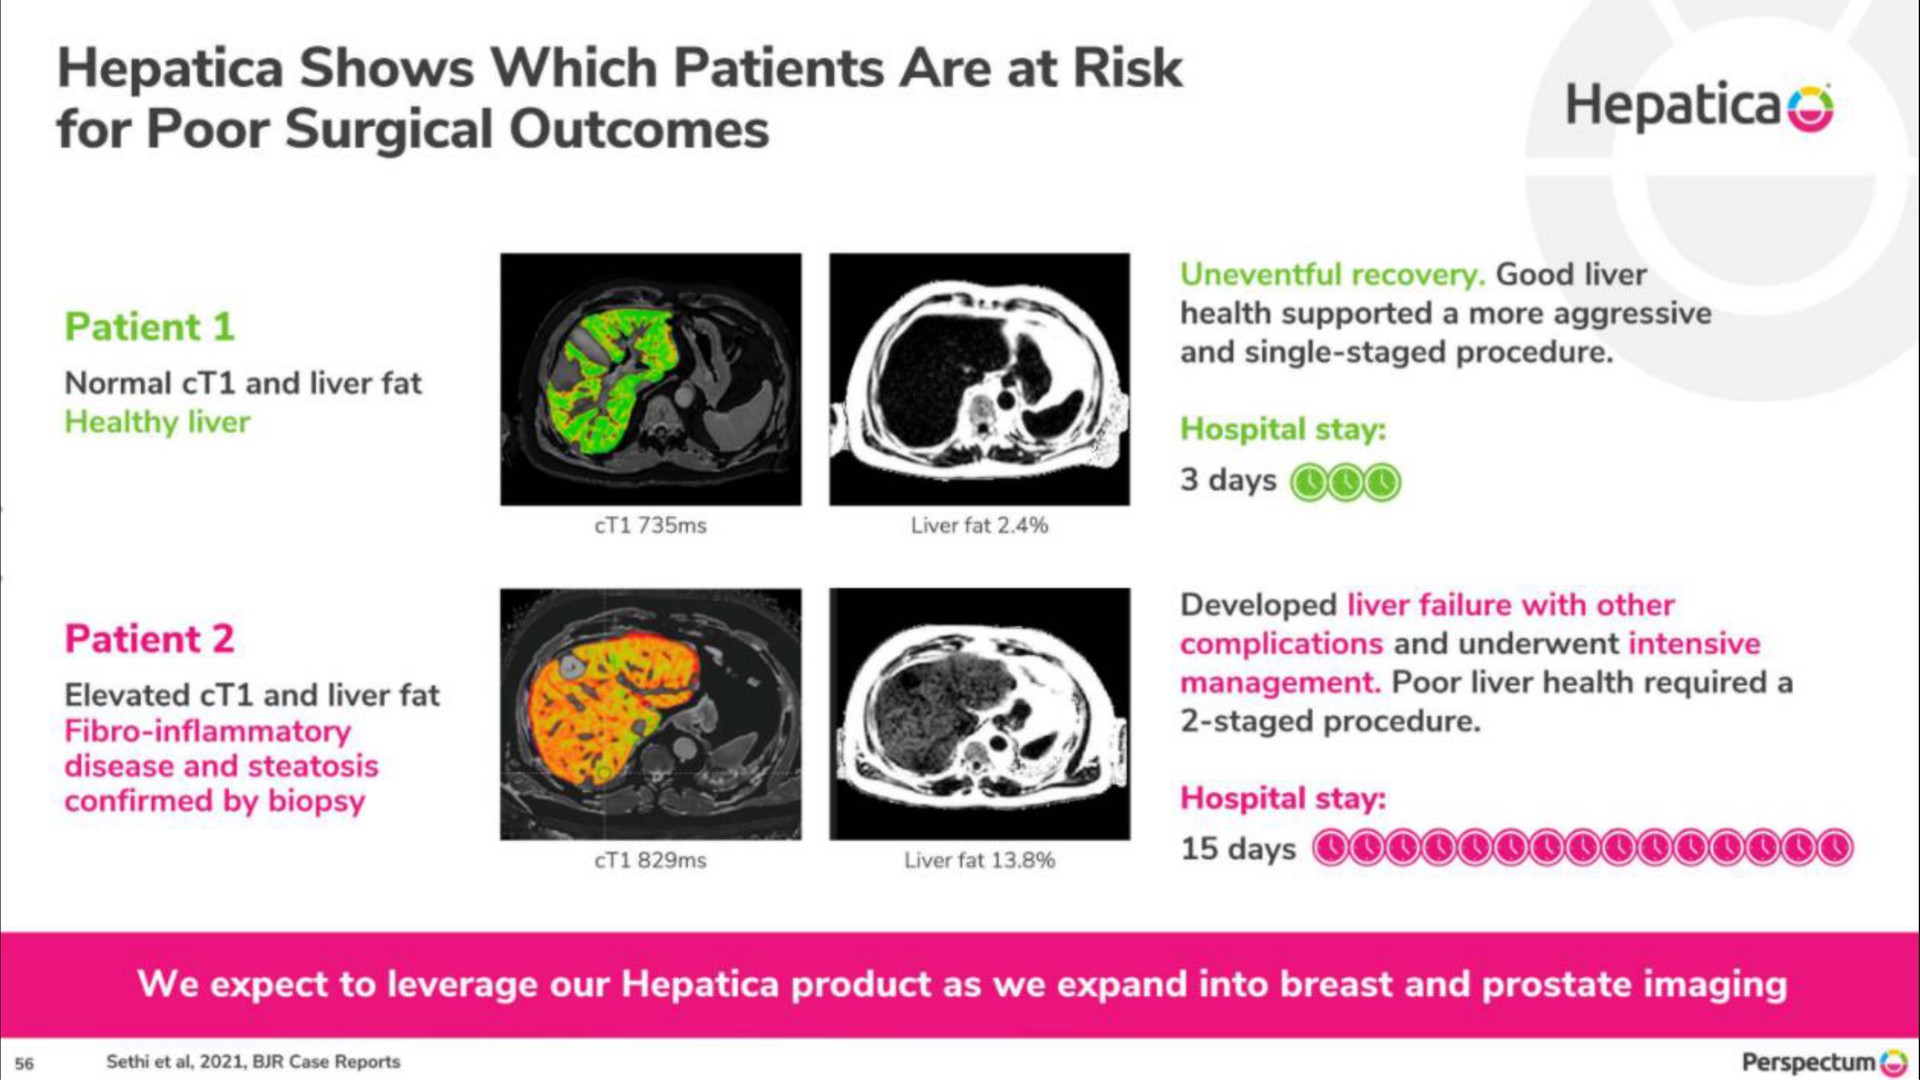 hepatica shows which patients are at risk for poor surgical outcomes | Perspectum